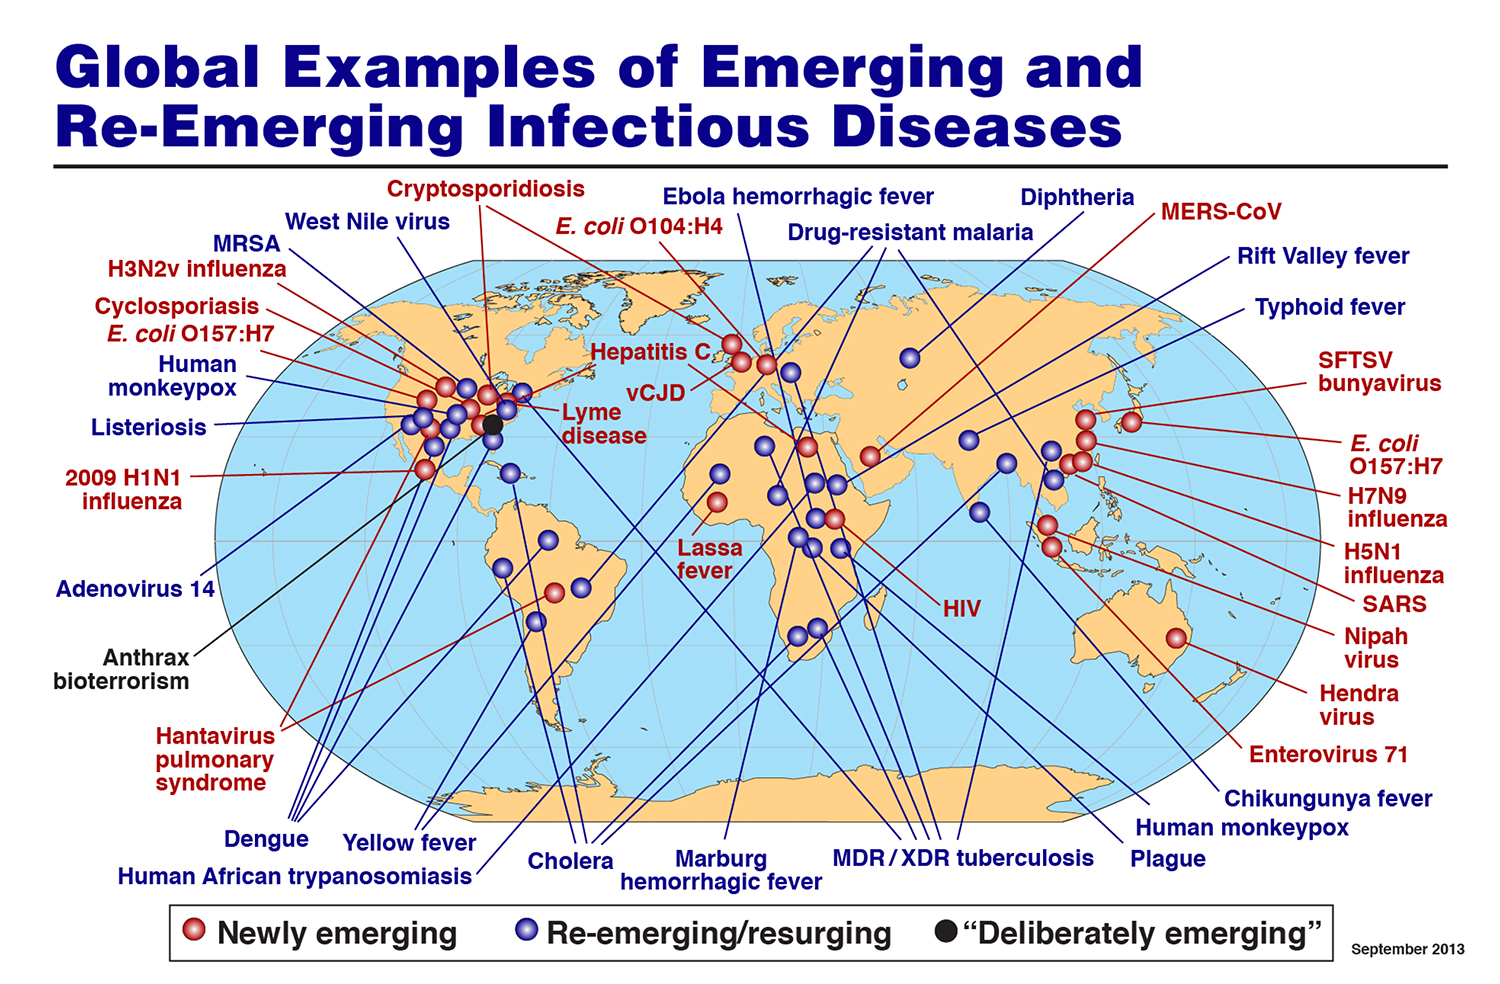 Global Examples of Emerging and Re-Emerging Infectious Diseases | [Source: HHS National Health Security Strategy (NHSS) including the Office of the Assistant Secretary for Preparedness and Response (ASPR)]